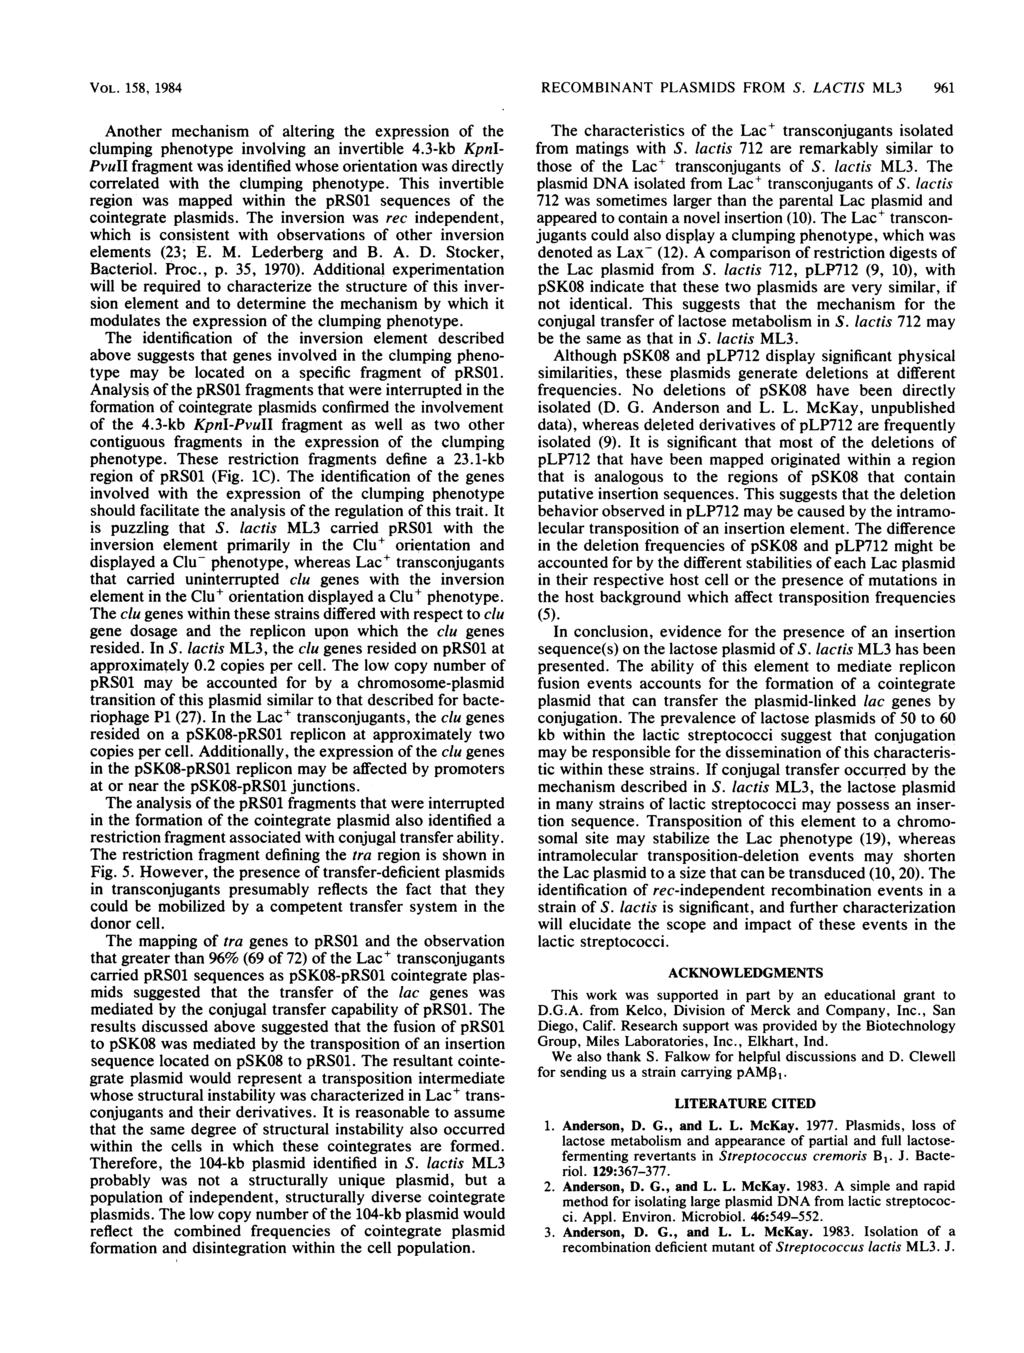 VOL. 158, 1984 Another mechanism of altering the expression of the clumping phenotype involving an invertible 4.